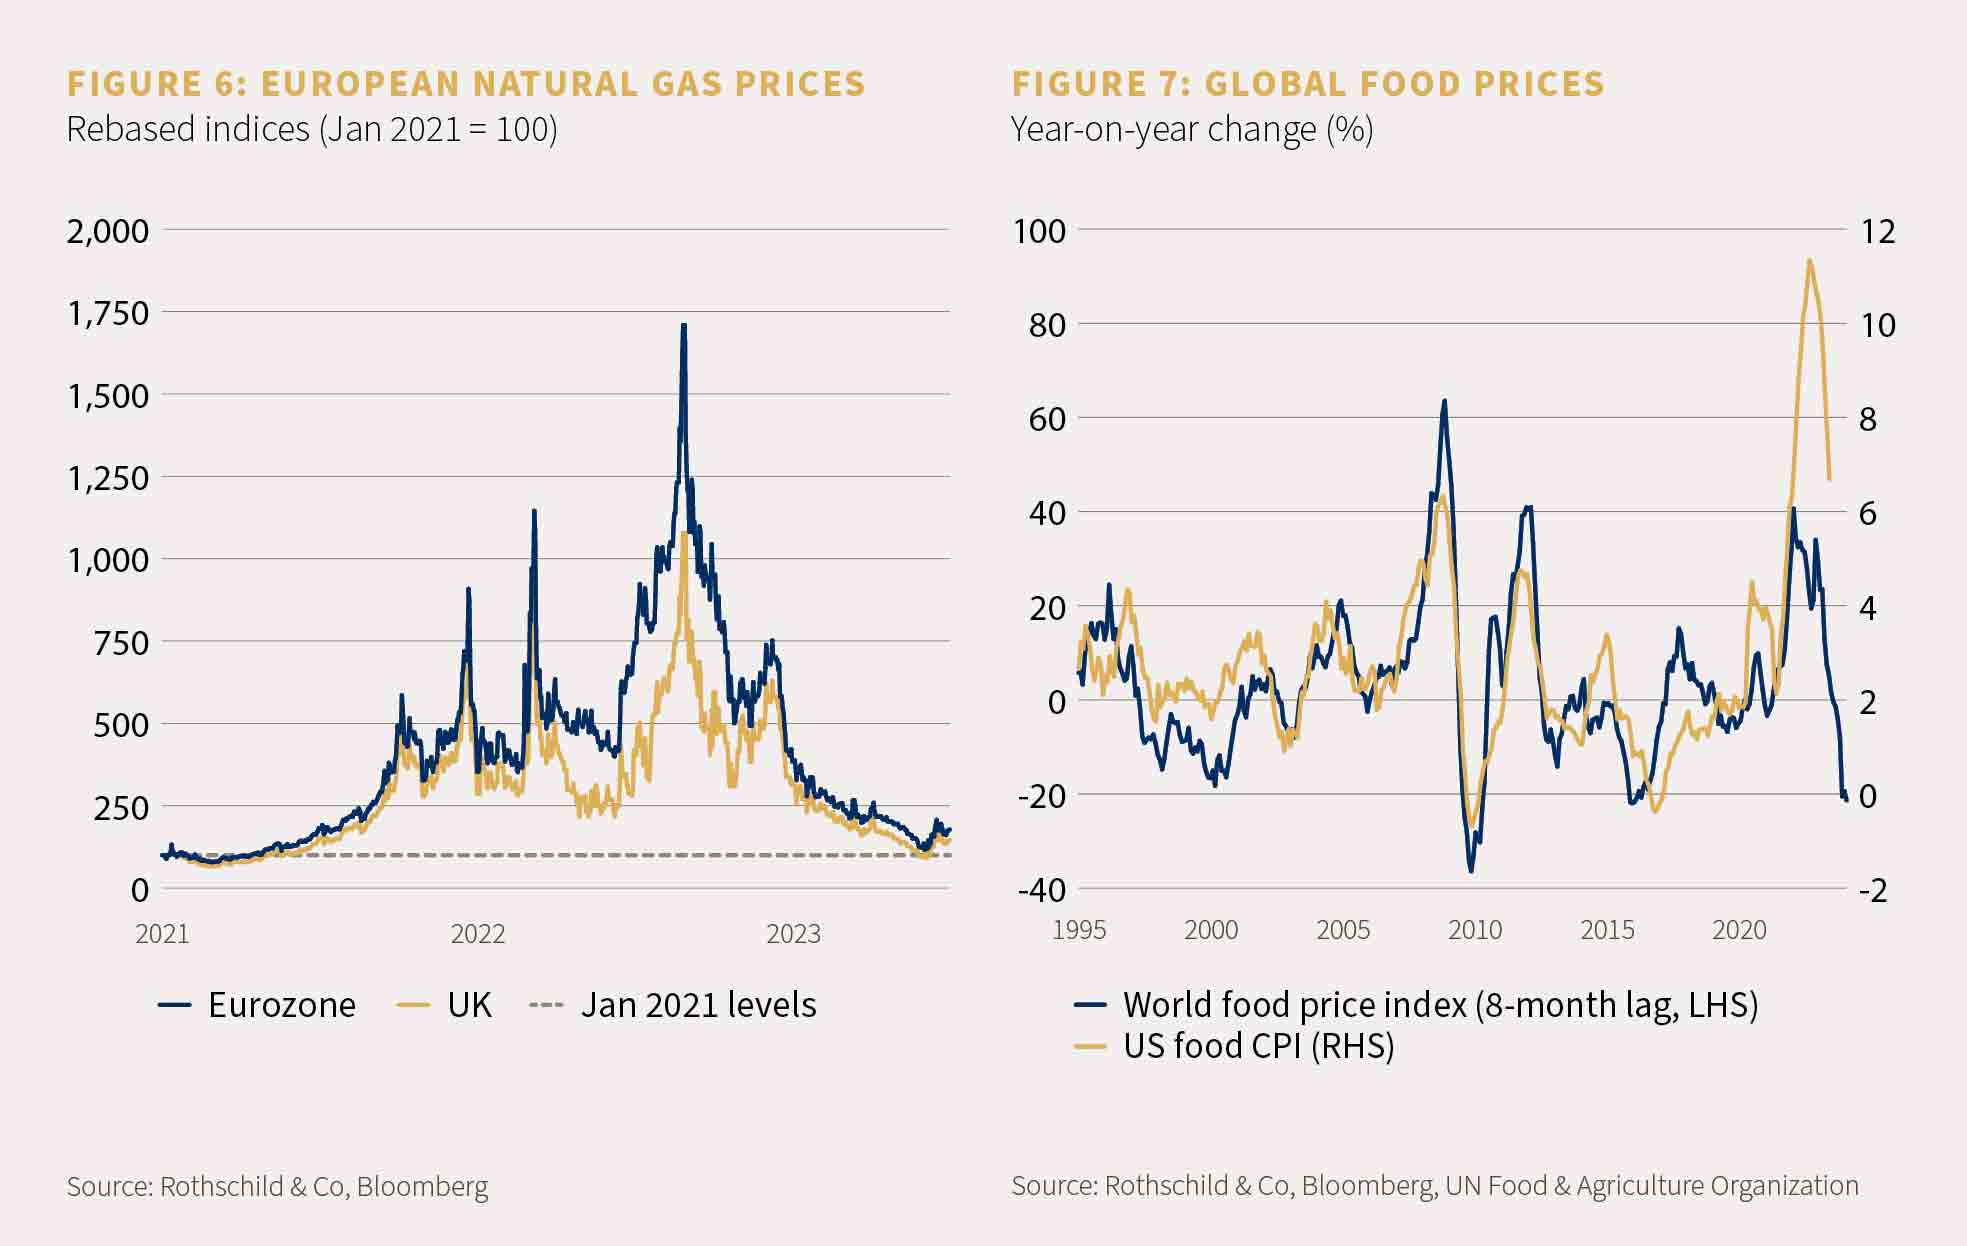 Two charts, one showing the European natrual gas prices and the other showing global food prices